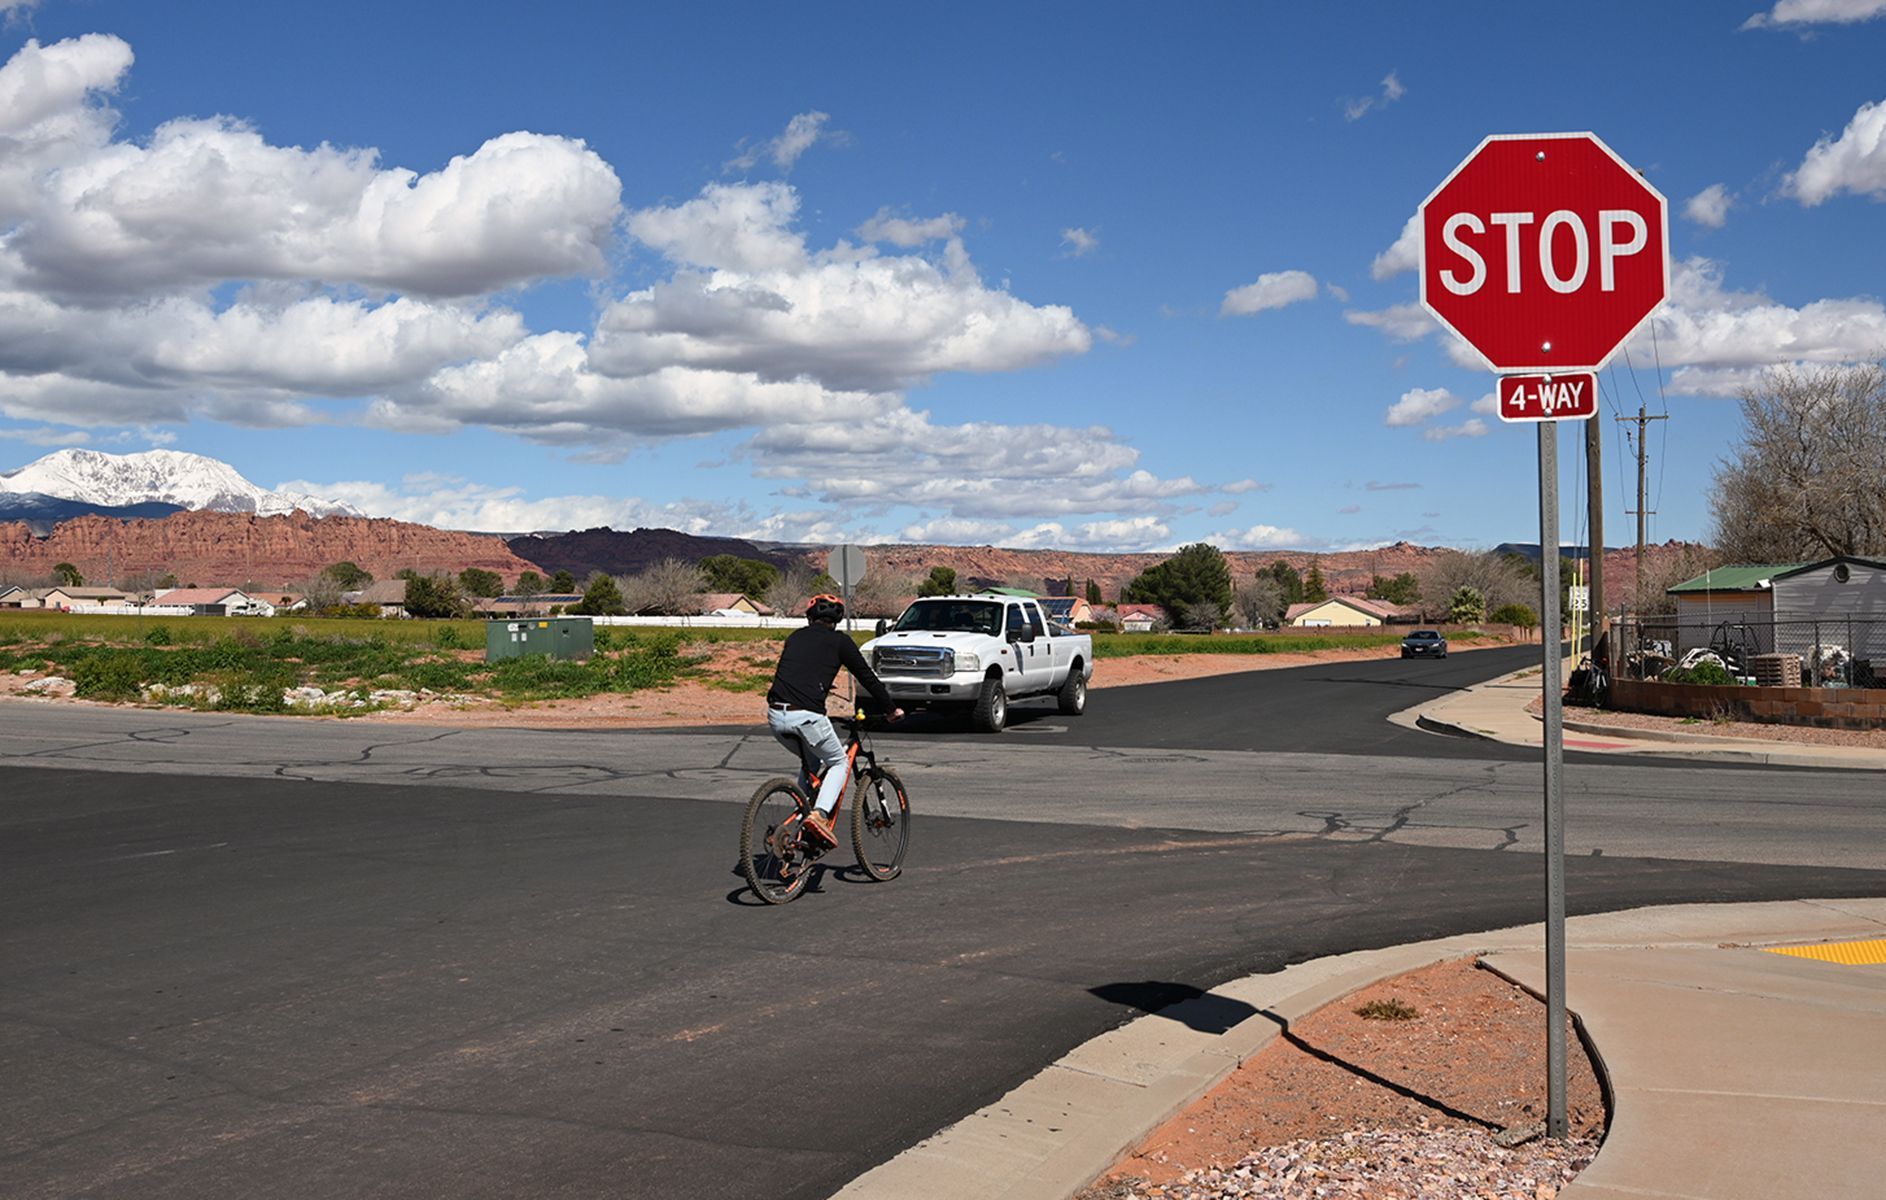 Bicycle rider at intersection with stop sign and car. Bicyclist practicing the stop-as-yield law